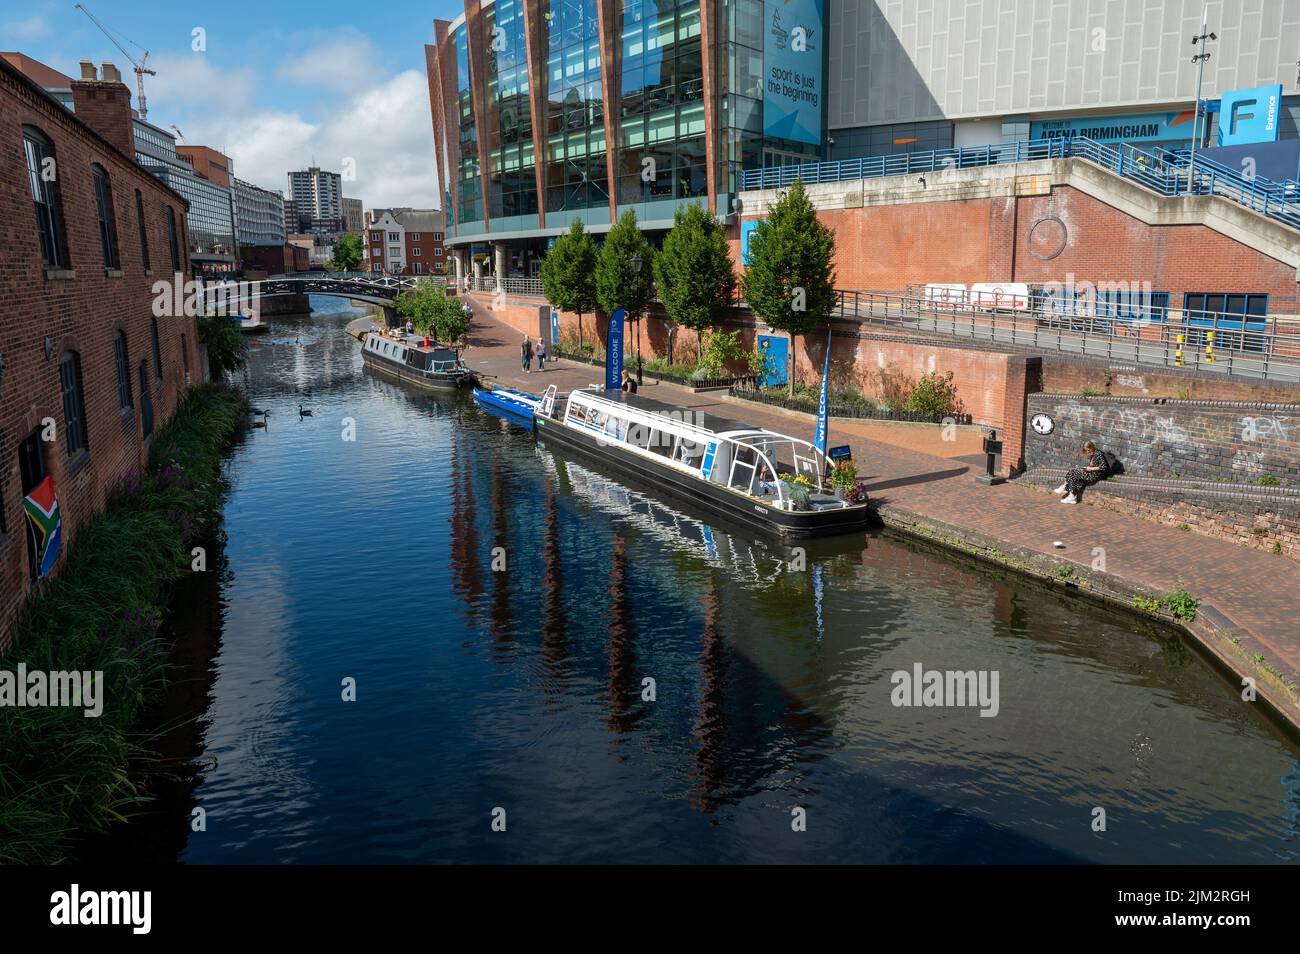 Boat called the Pennine Princess moored on the canal in Birmingham during the 2022 Commonwealth Games close to the NIA. Stock Photo